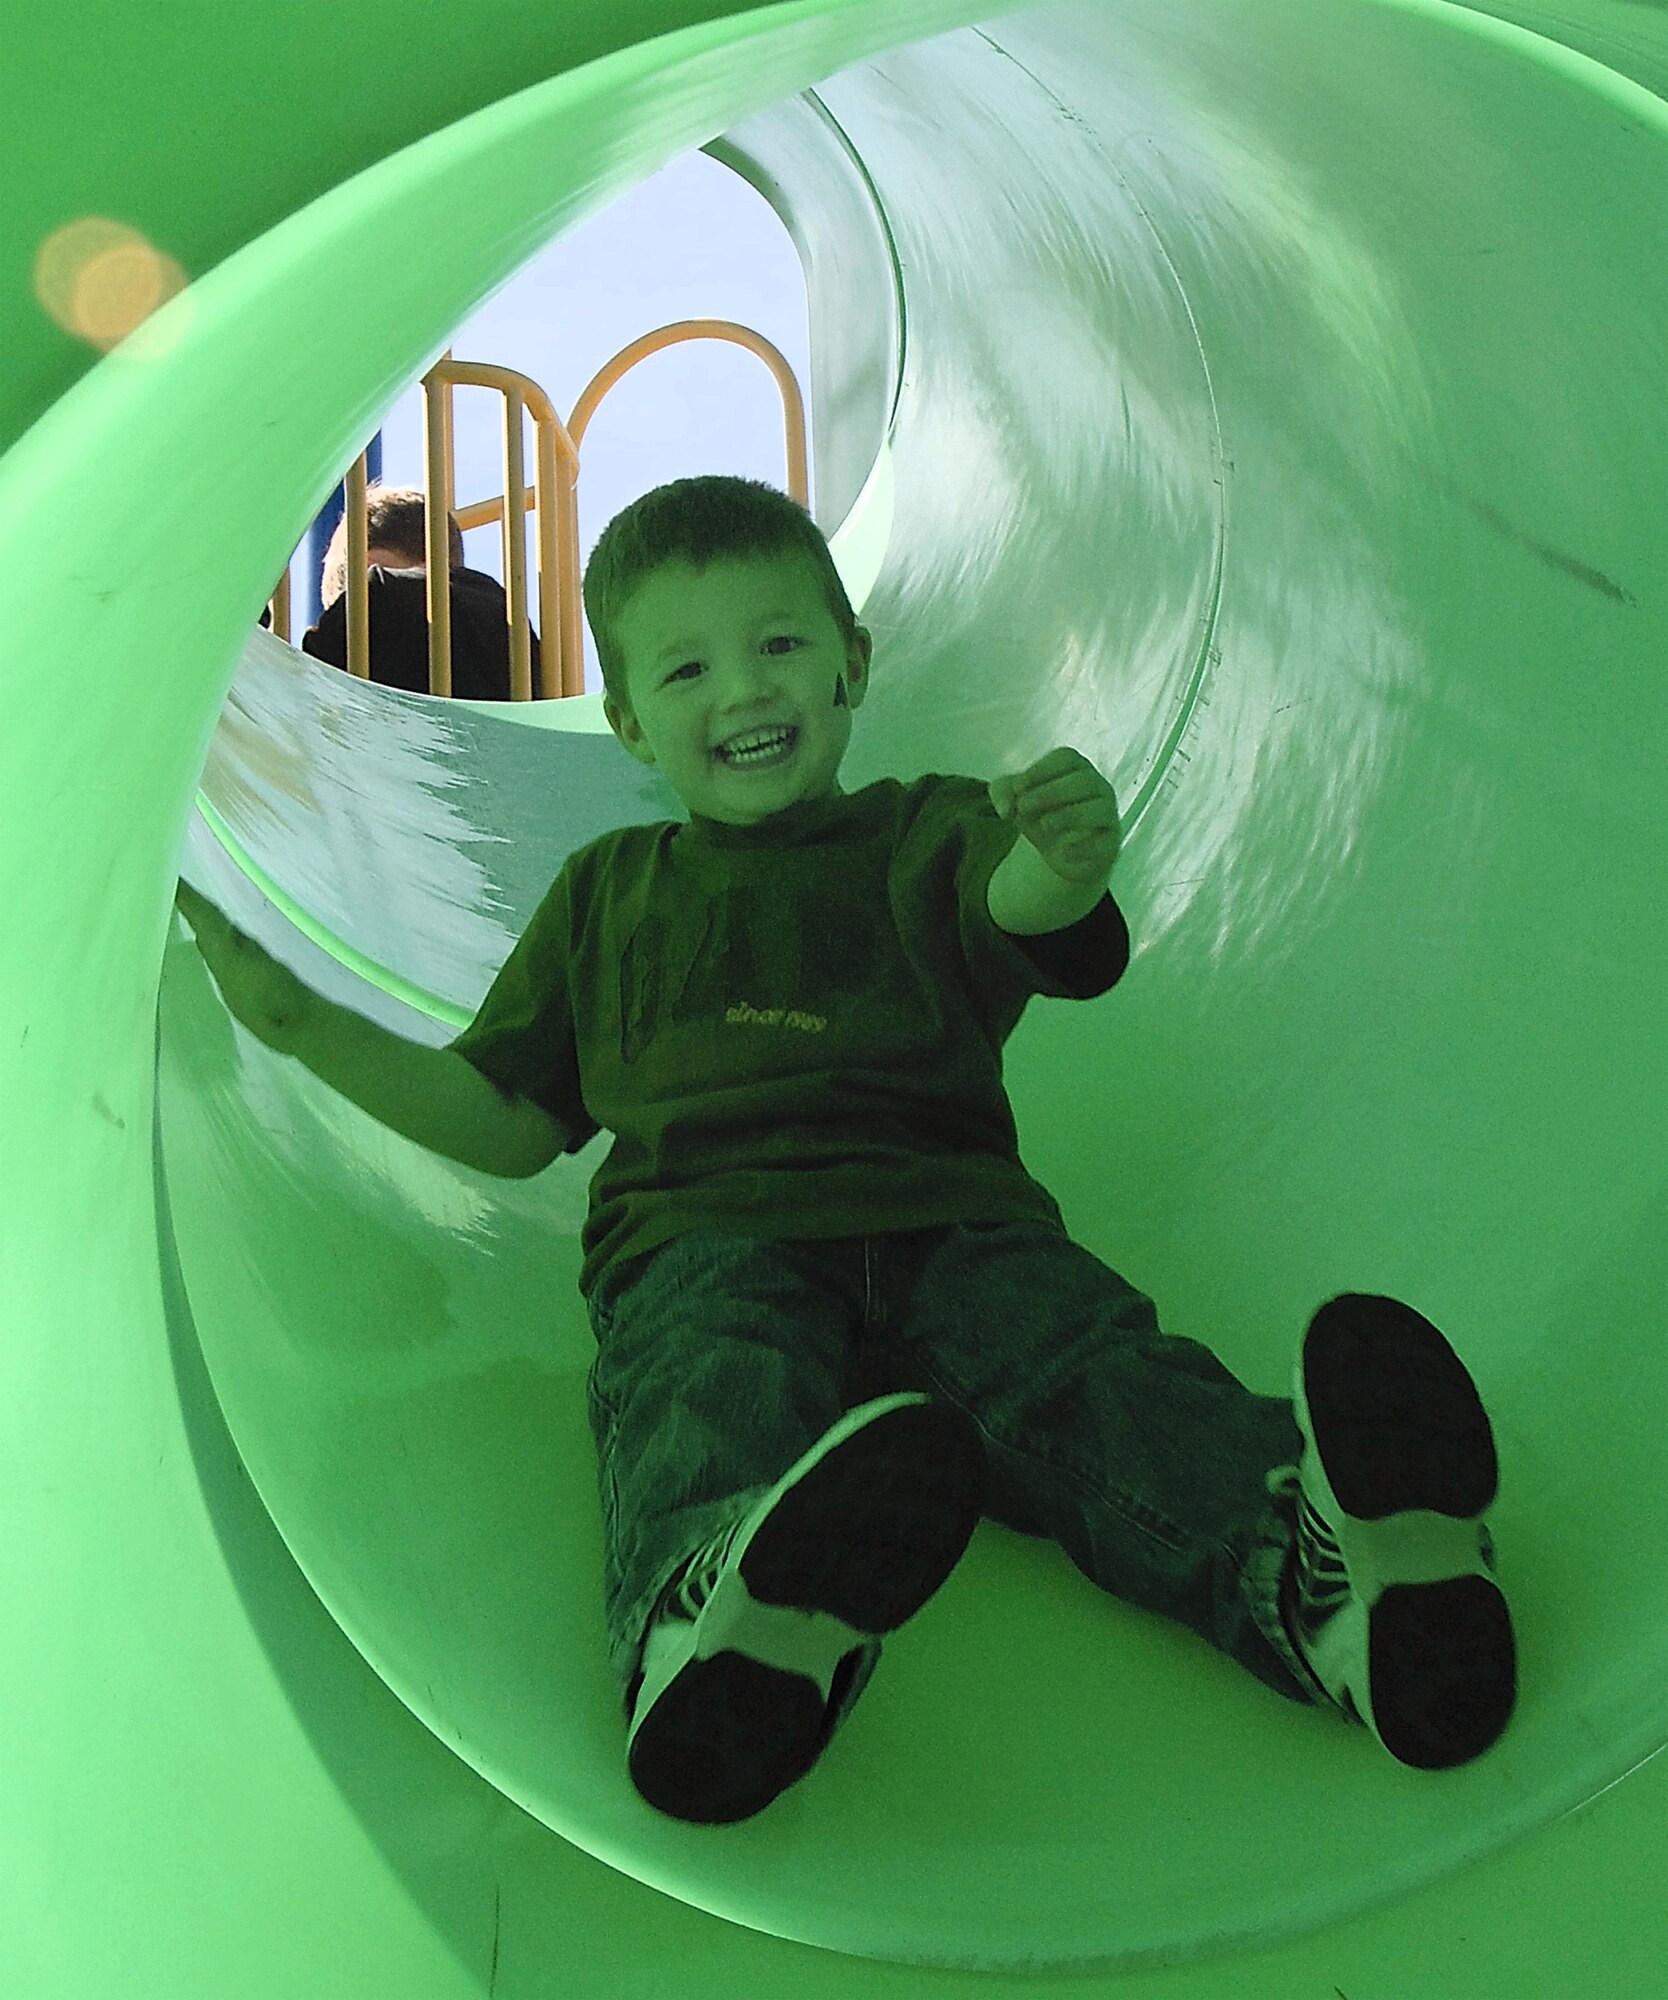 Family fun was the name of the game at the 442nd Fighter Wing's Family Appreciation Day picnic Oct. 14, 2007. Sunlight filtering through a tubular playground slide casts a green tint on one happy picnic goer. The 442nd is an Air Force Reserve Command A-10 Thunderbolt II unit based at Whiteman AFB, Mo.  (US Air Force photo/Master Sgt. Bill Huntington)